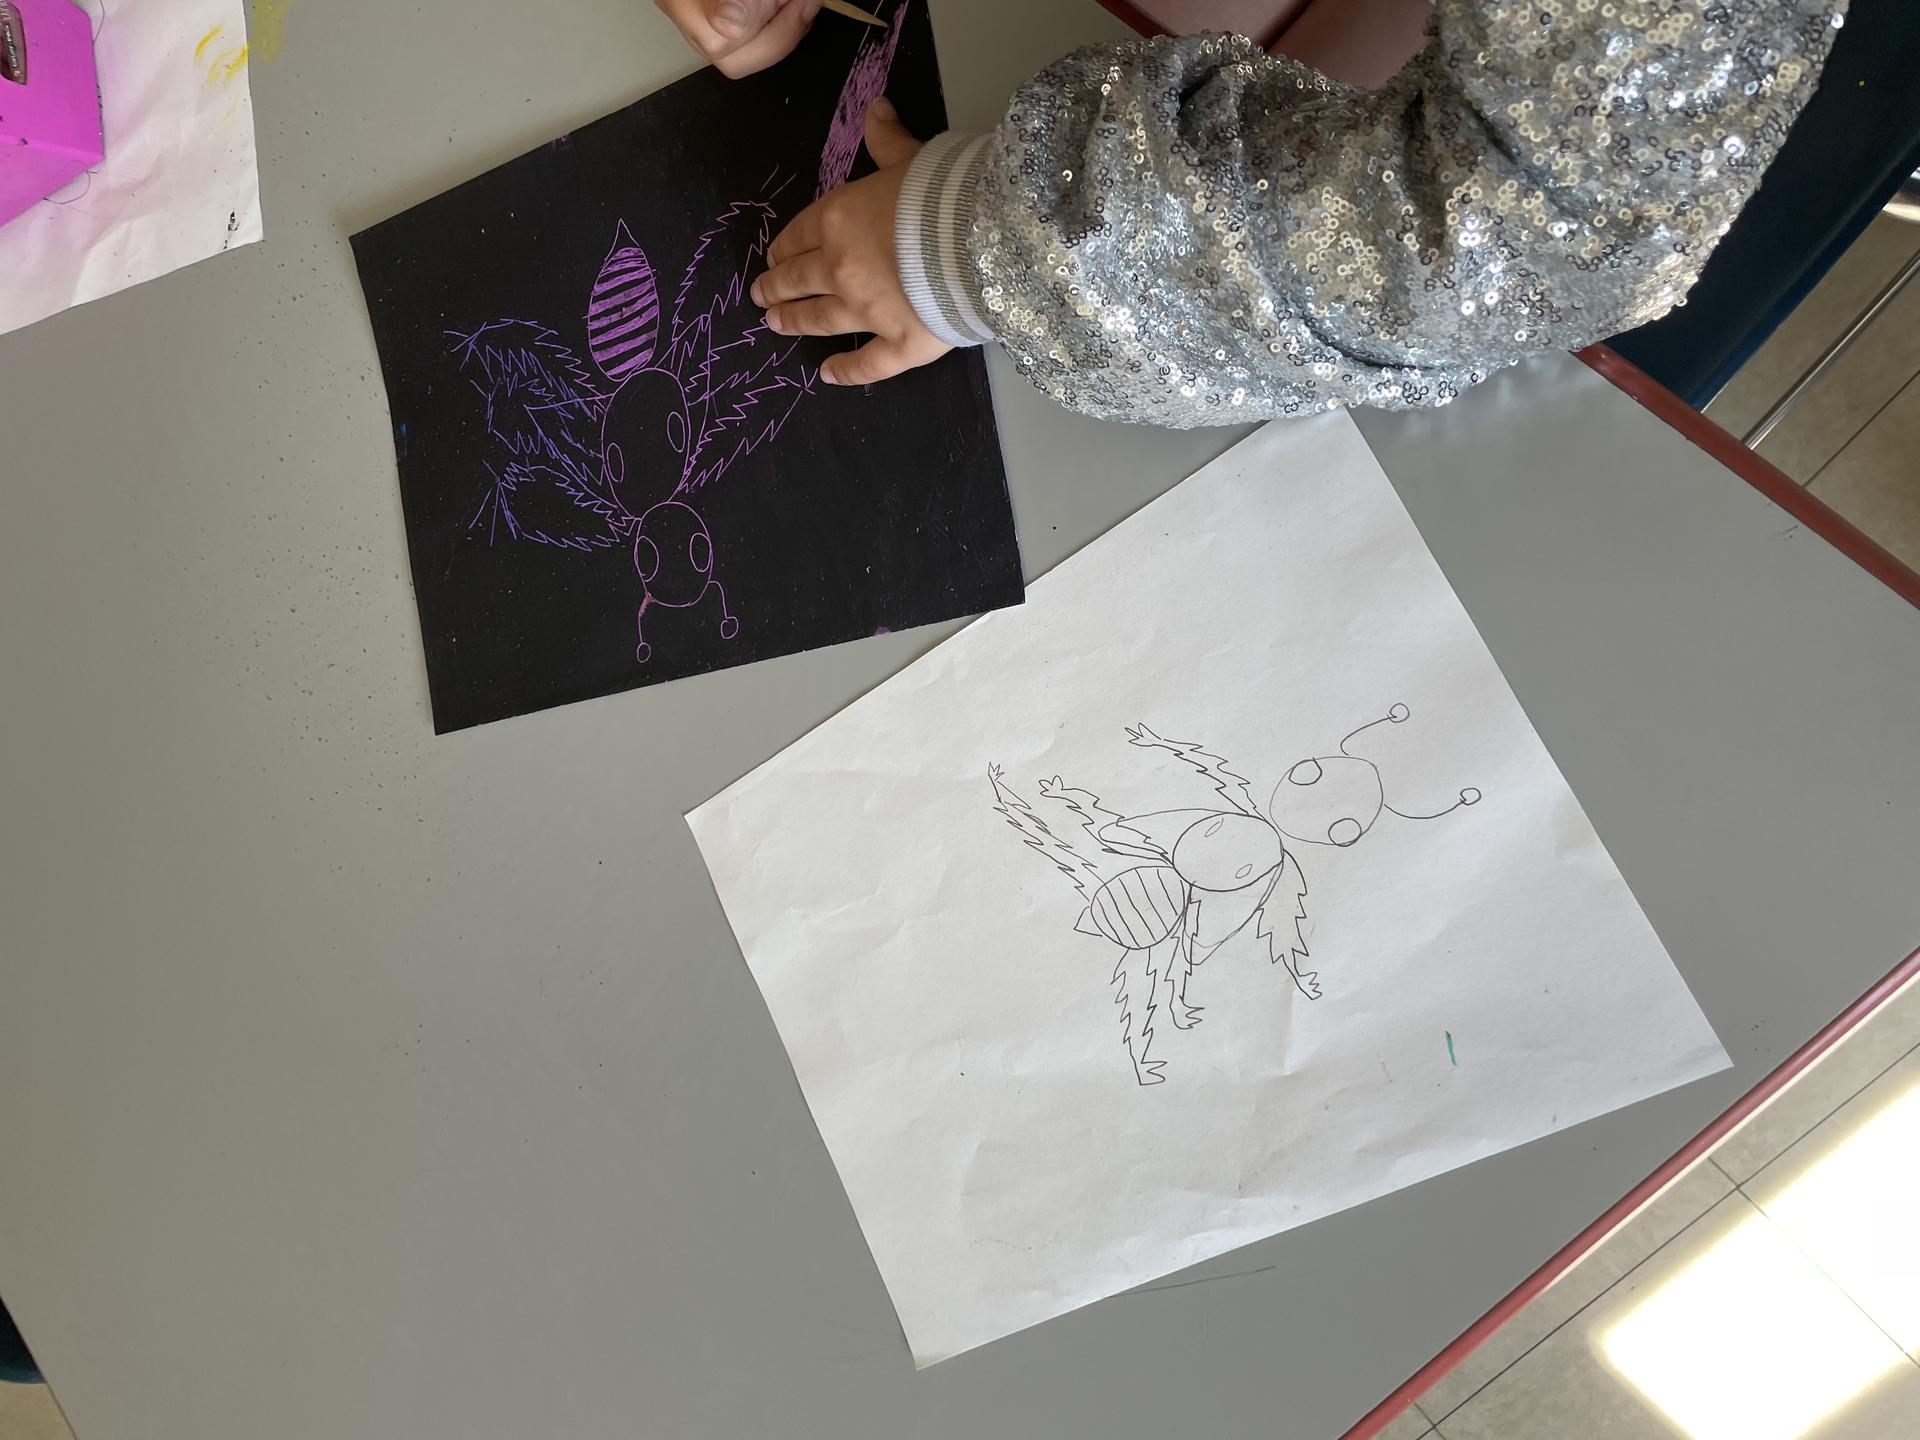 Students use wooden tools to etch into their tempera paint, uncovering color underneath the surface to create an insect with lines. 